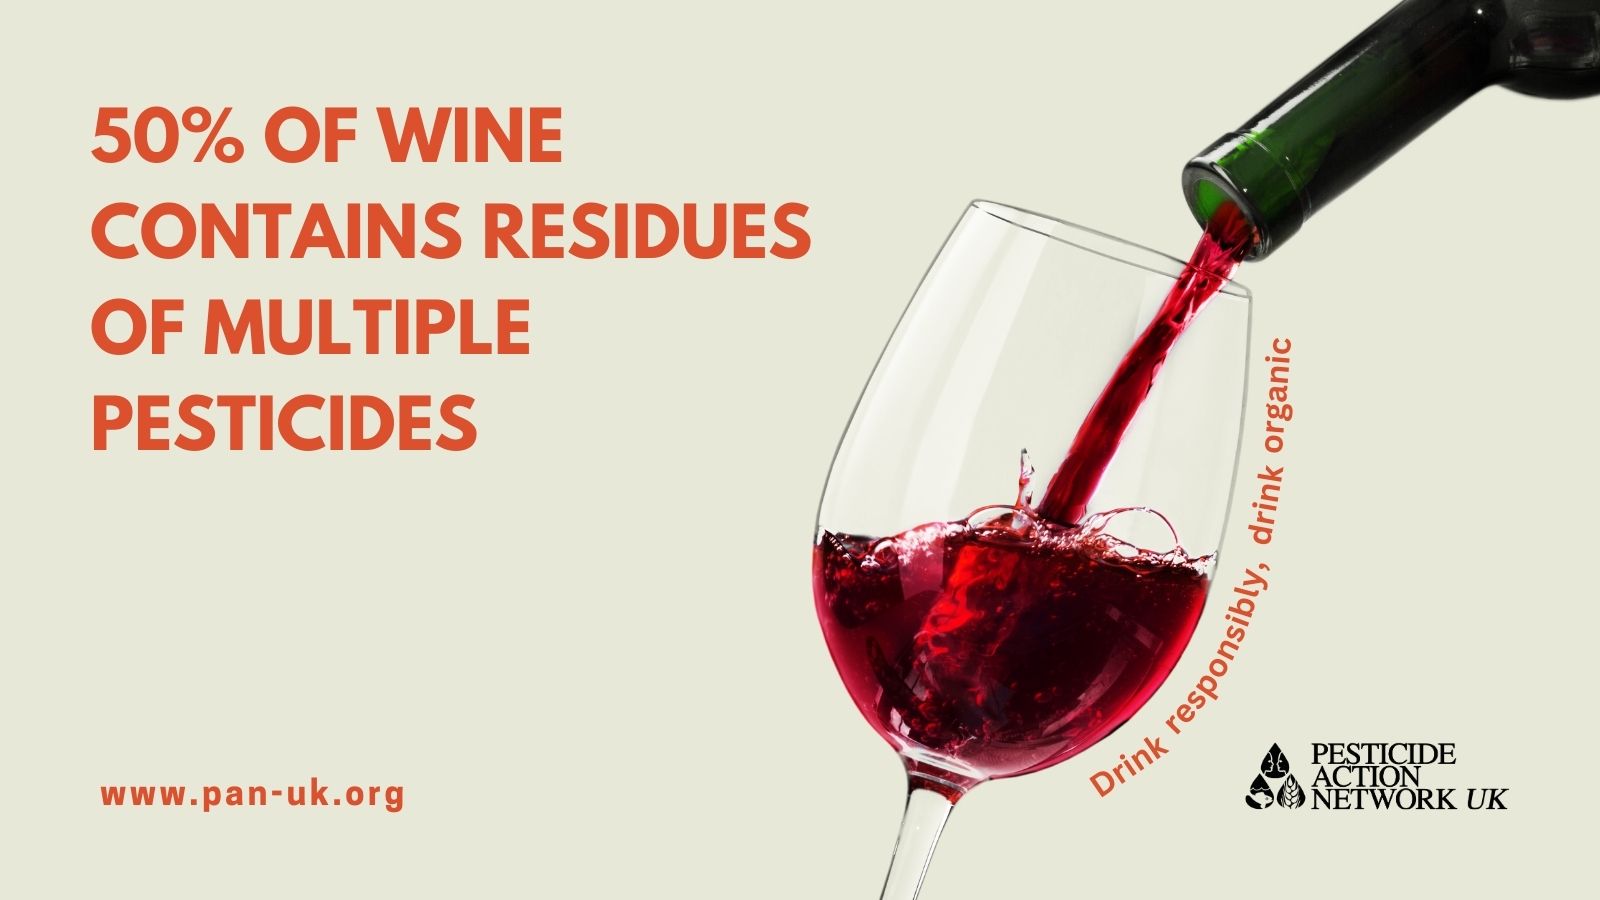 50% of wine contains residues of multiple pesticides